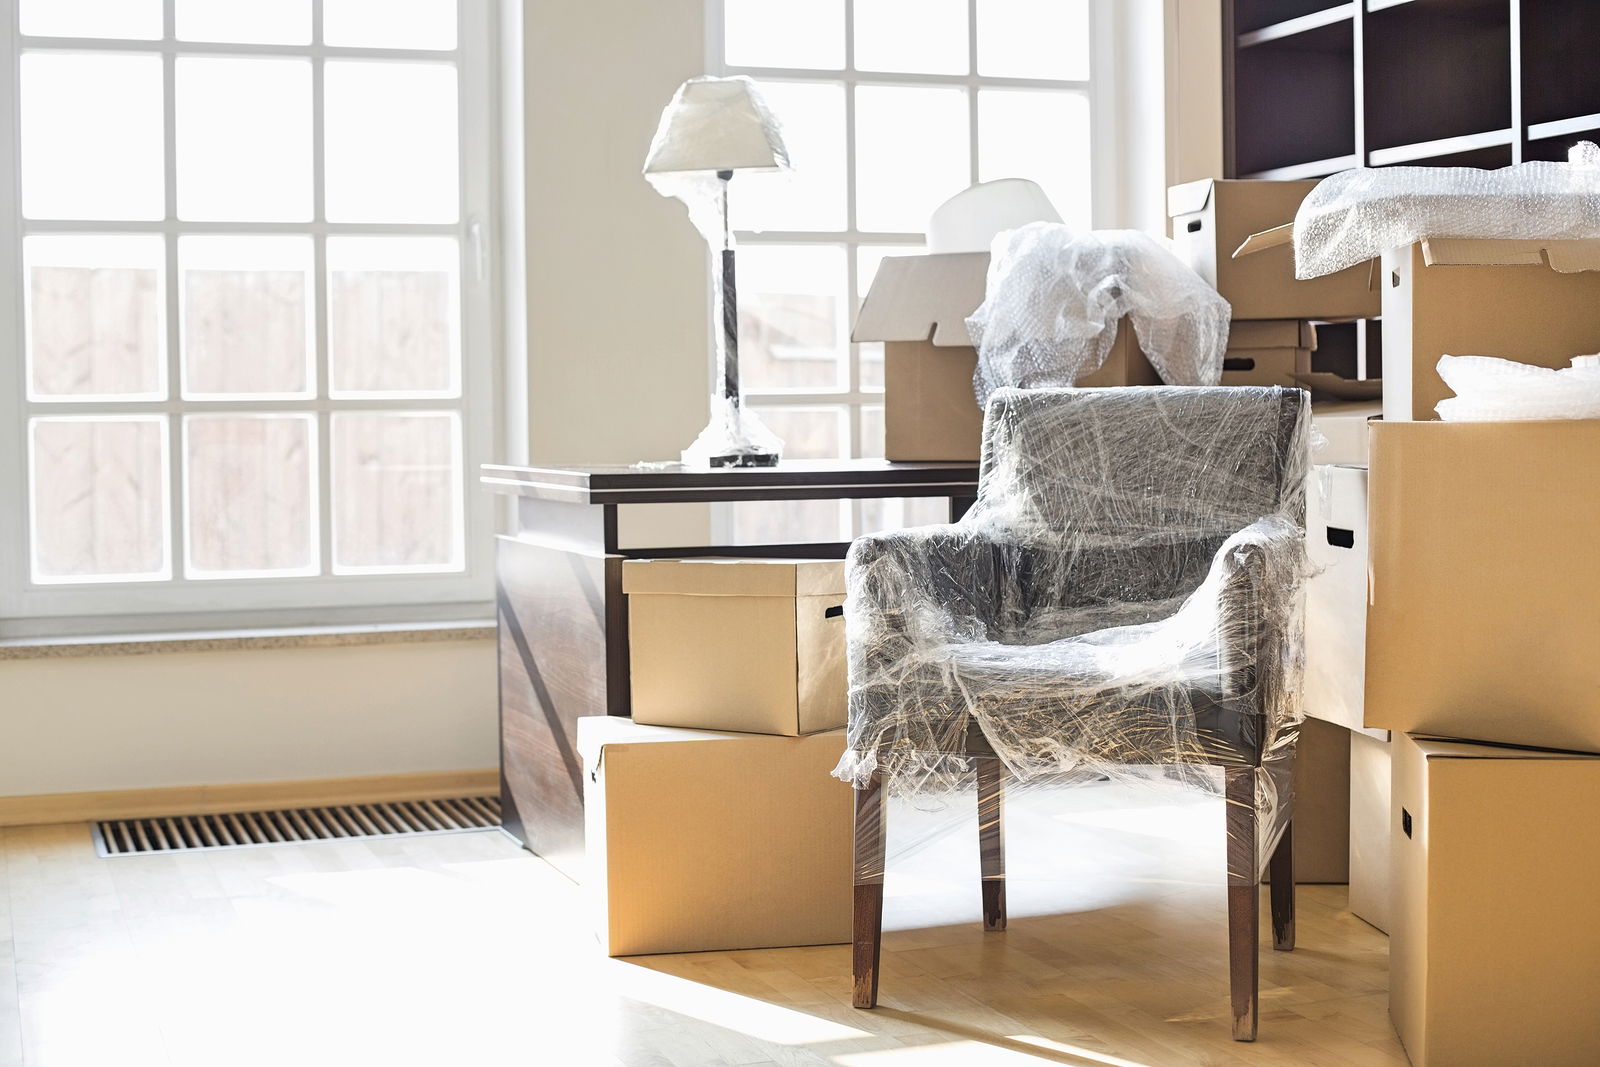 moving and packing mistakes to avoid